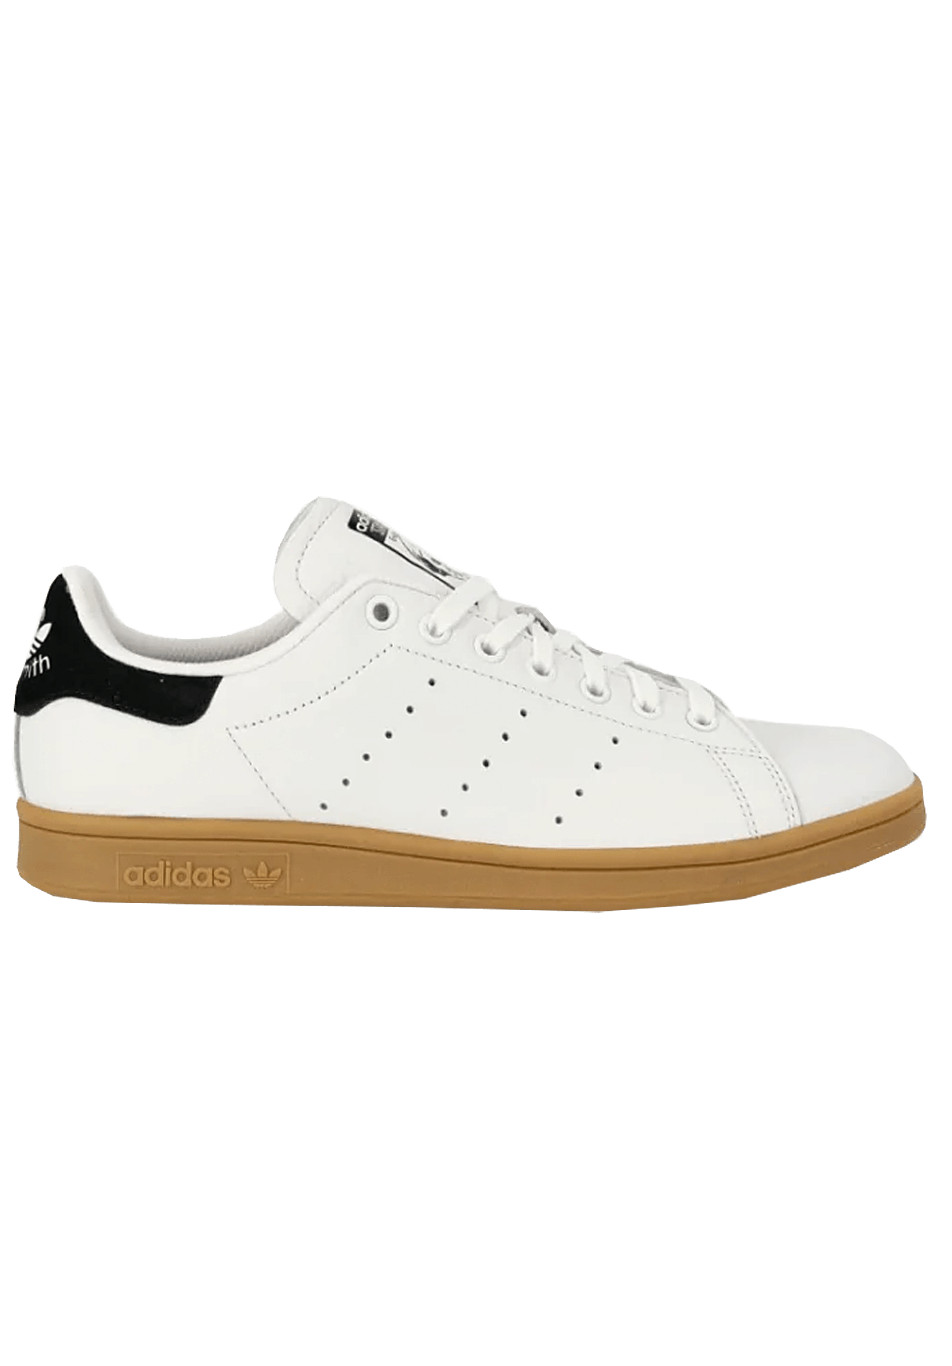 adidas Skateboarding Stan Smith ADV Shoes ONLINE ONLY